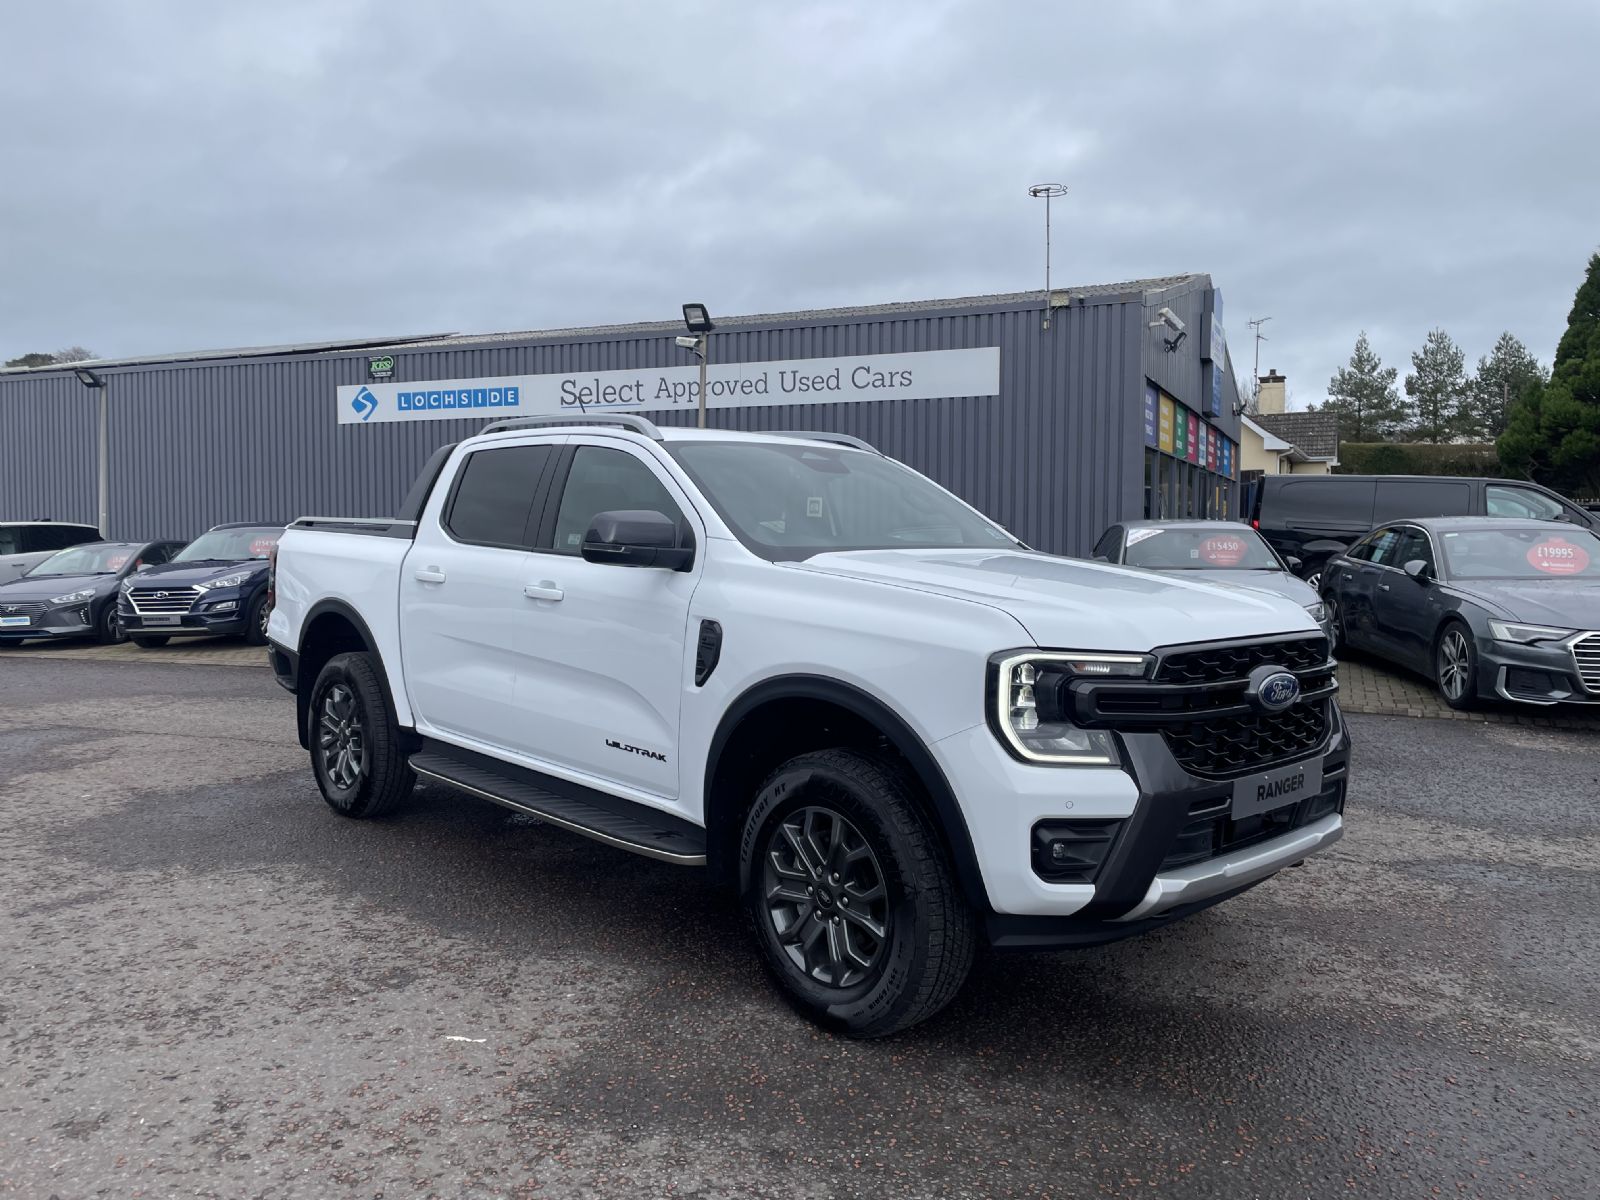 Ford Ranger 2.0 TD Double Cab Auto 205ps